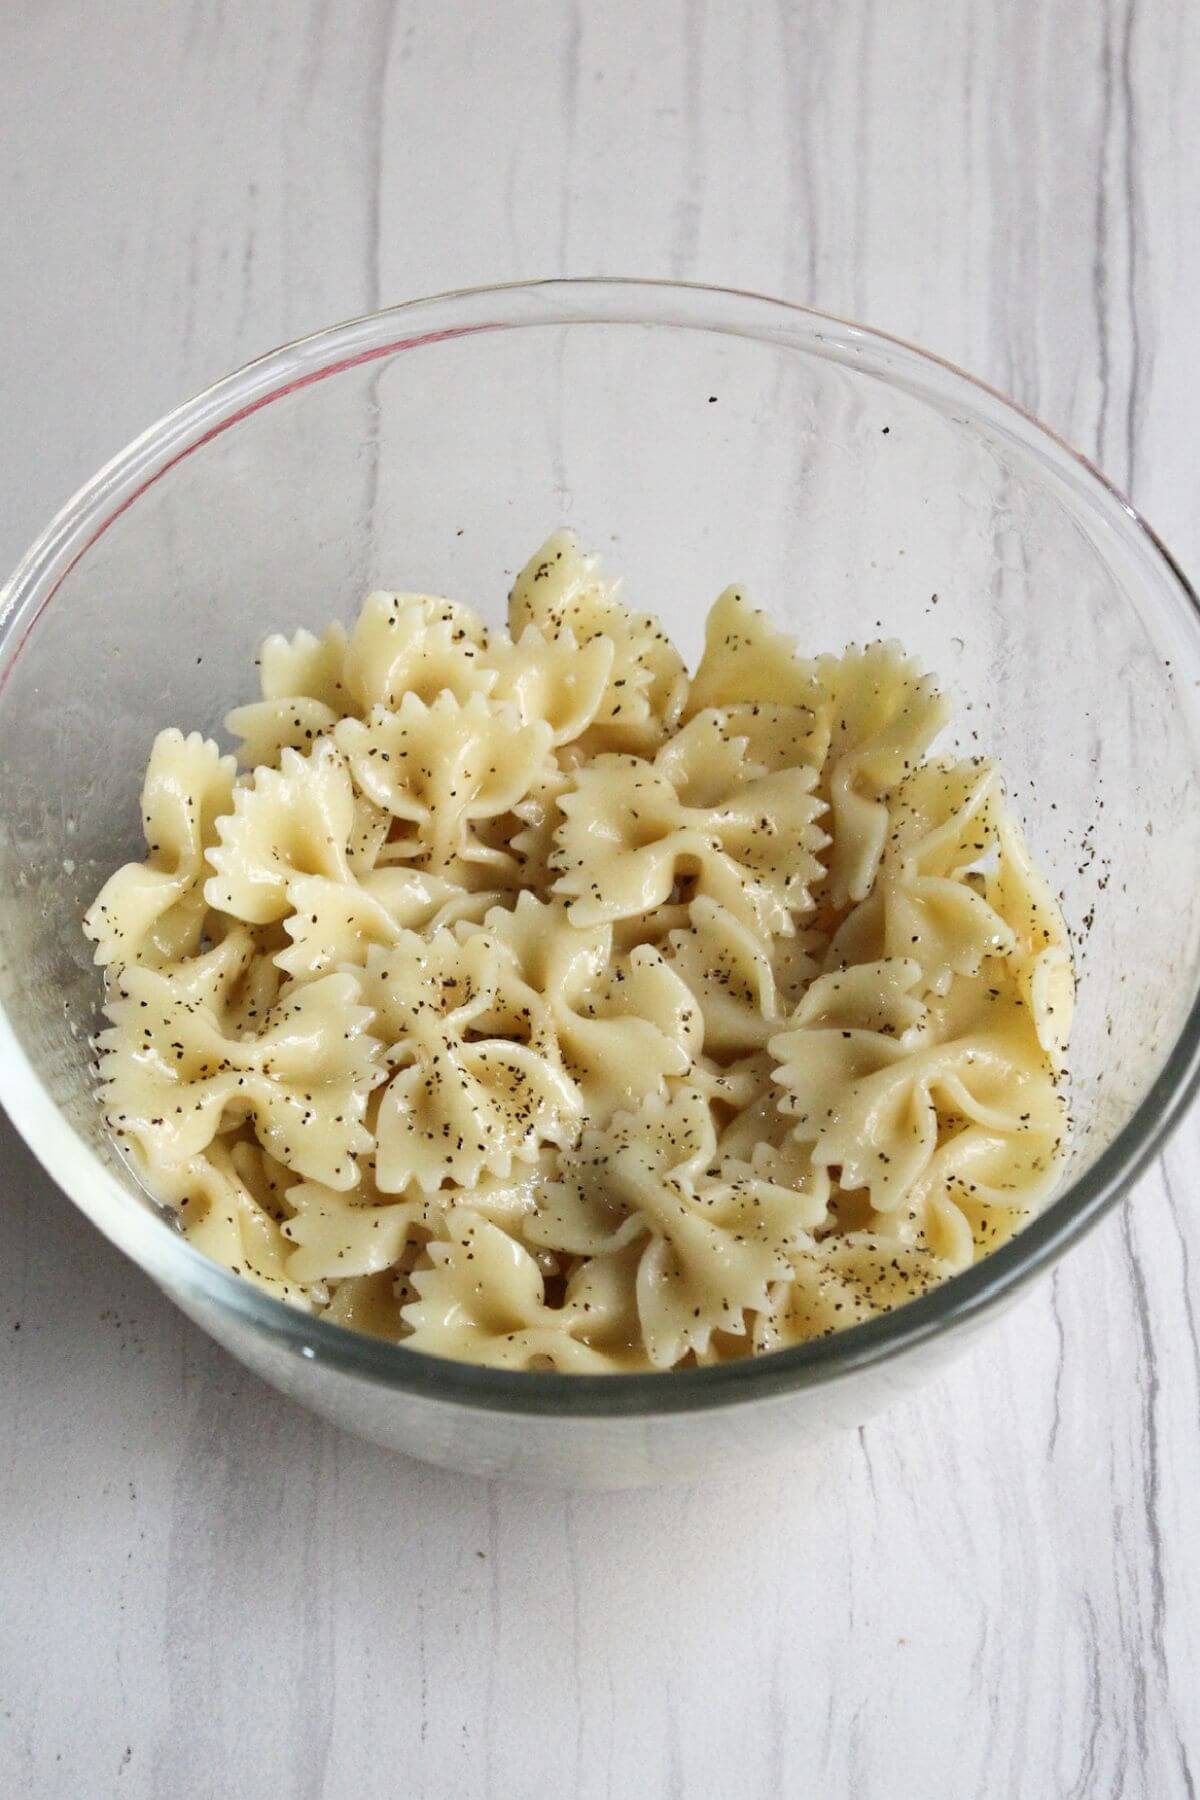 Cooked bowtie pasta in bowl with ground black pepper.